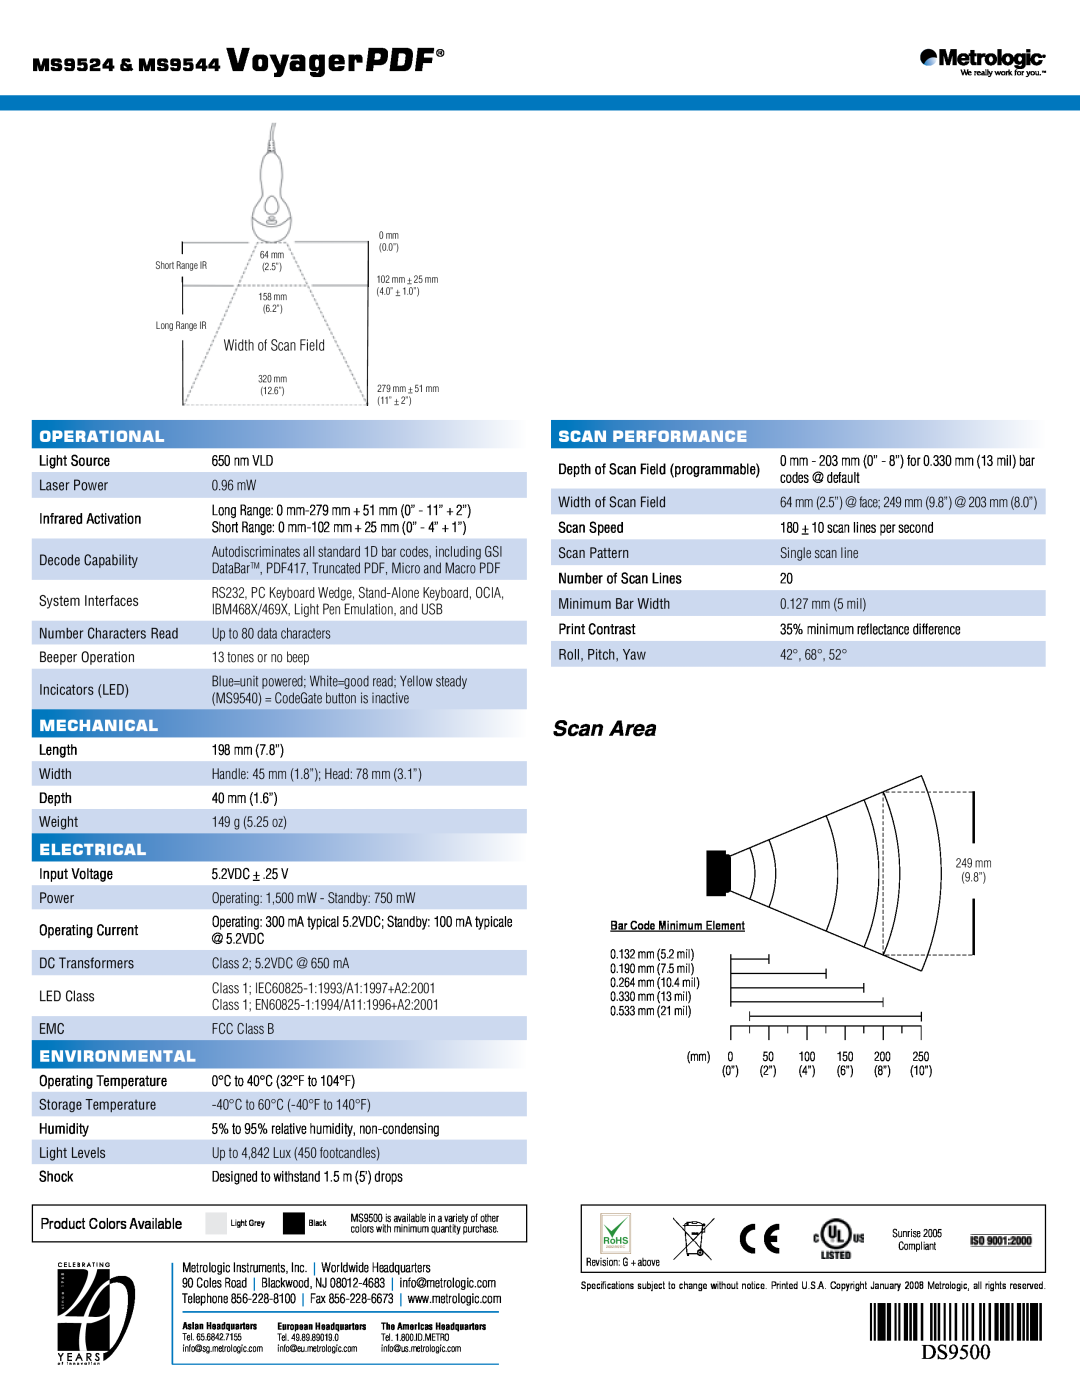 Metrologic Instruments manual Scan Area, DS9500, MS9524 & MS9544 VoyagerPDF, Operational, Scan Performance, Mechanical 